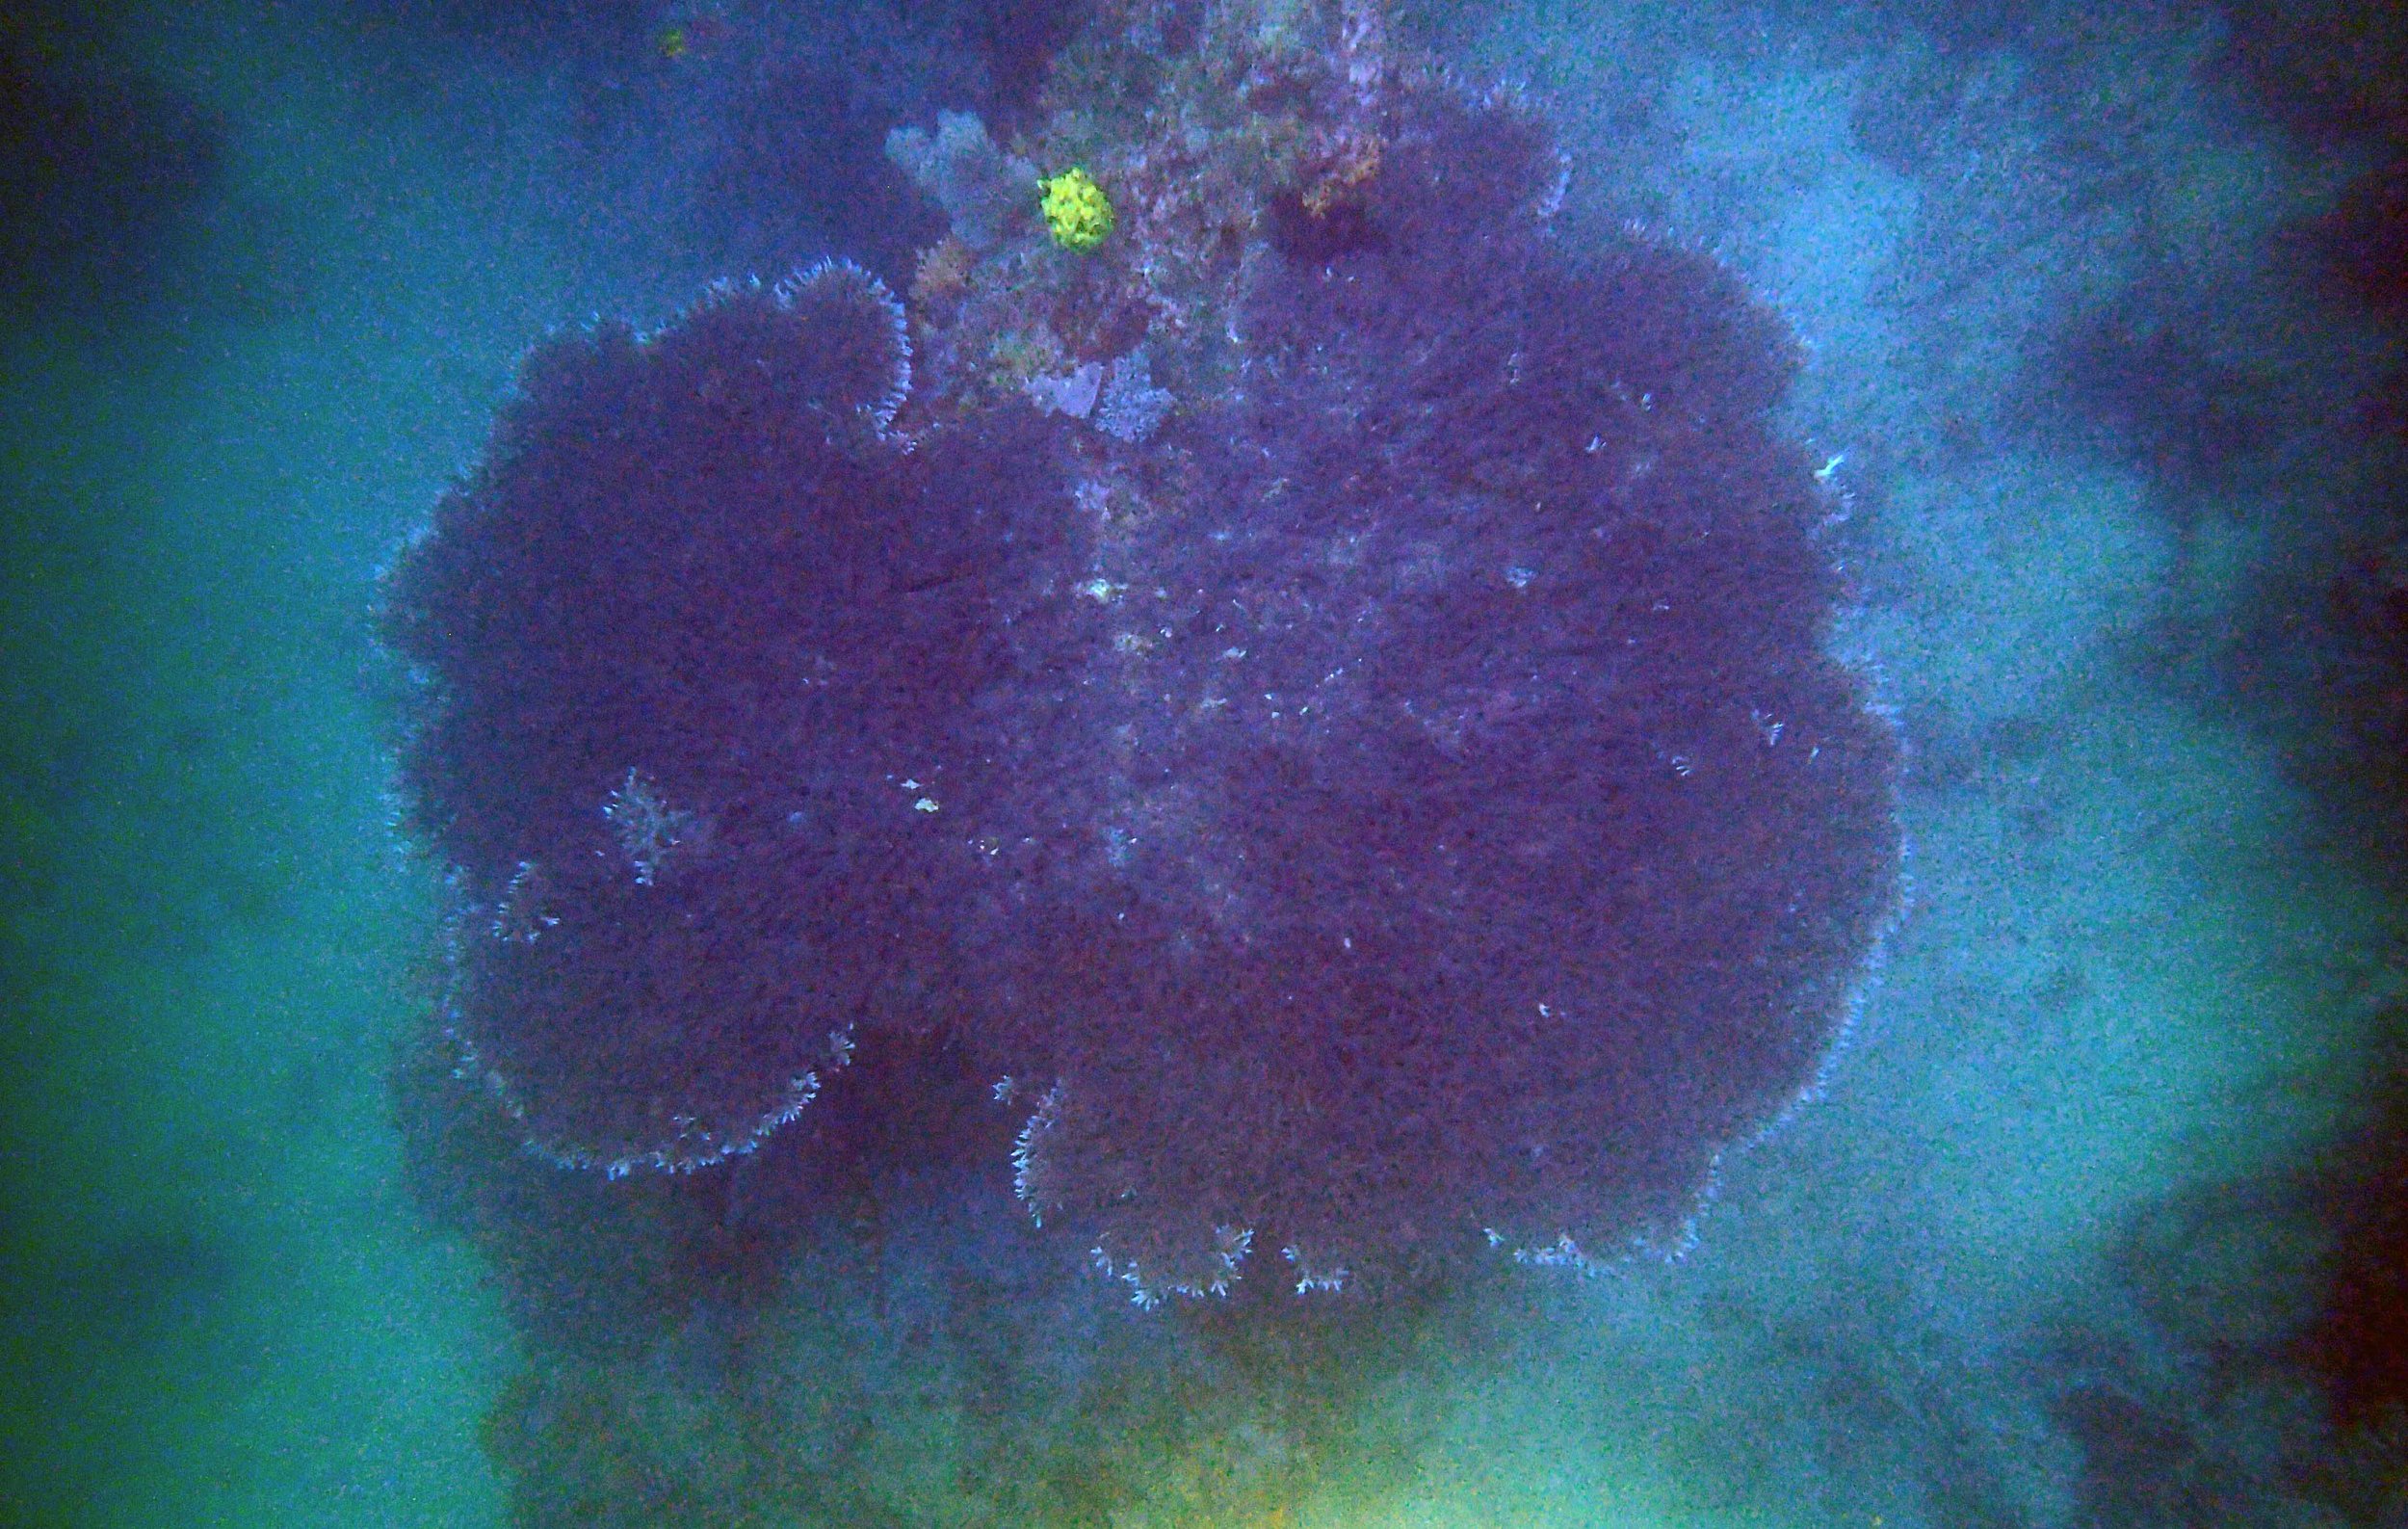 monster Acropora table from above.jpg